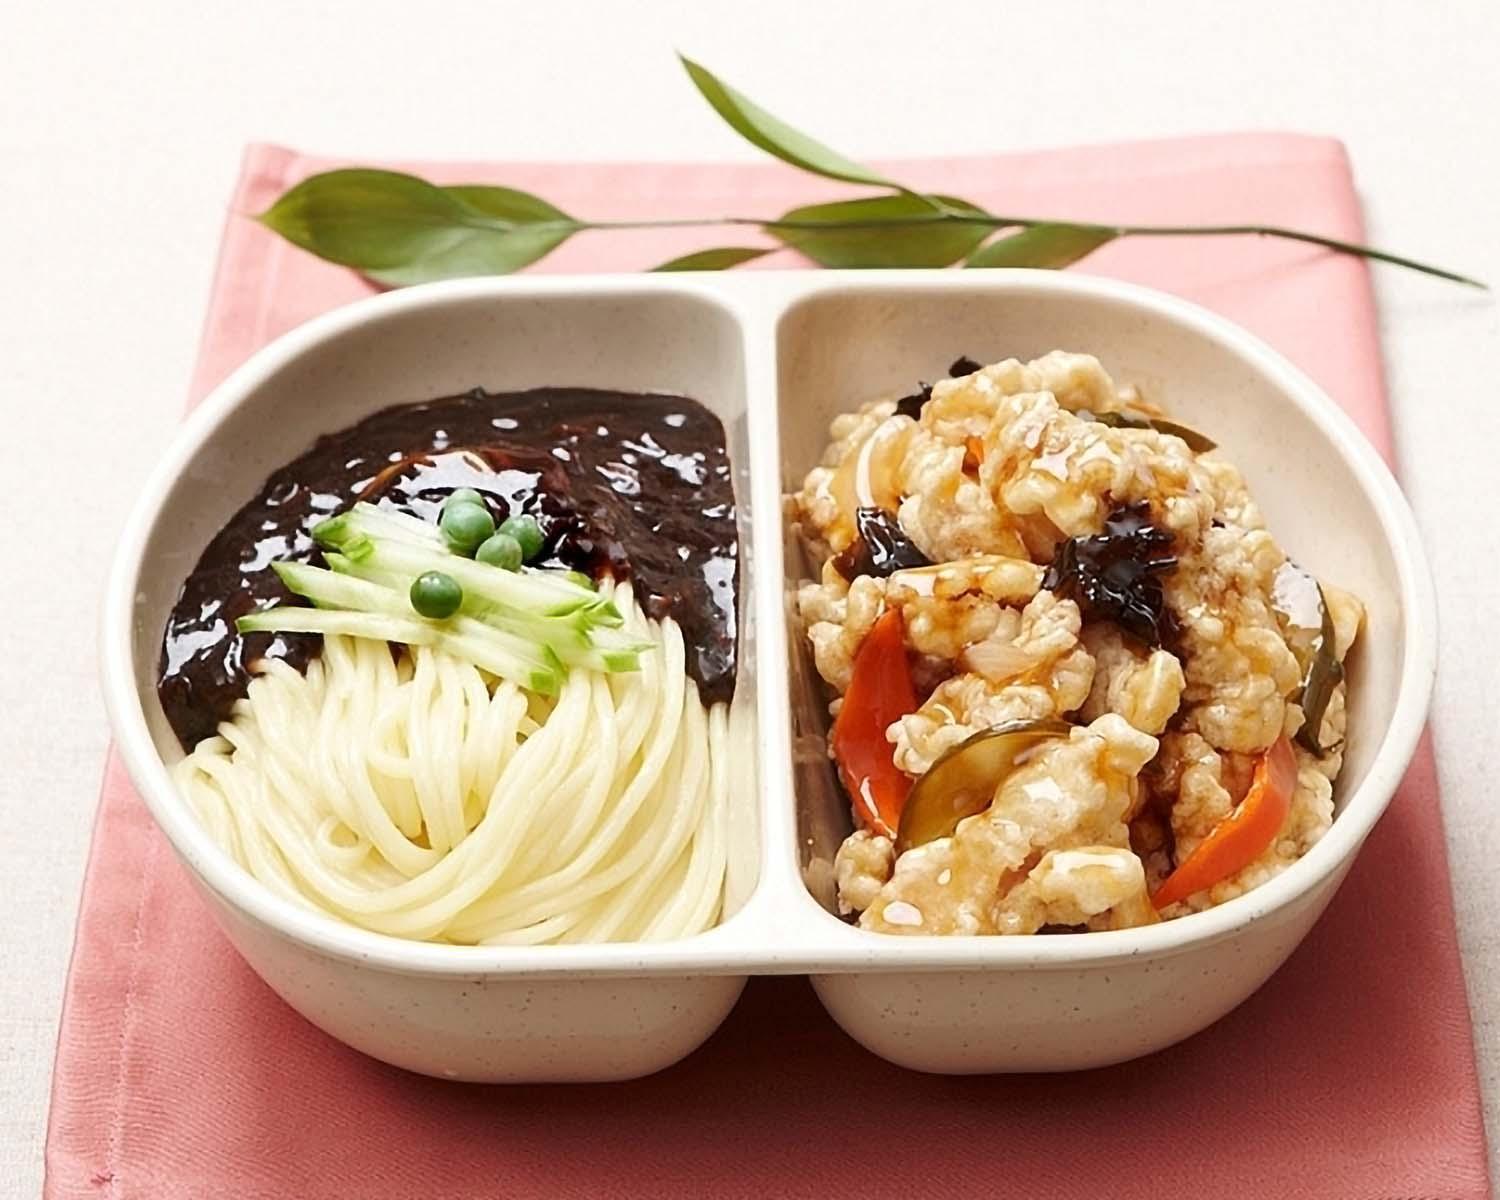 Delicious Chinese delivery: enjoy a set of tasty, traditional dishes including noodles, rice, and tangsuyuk in mixing bowls on a table with tableware.